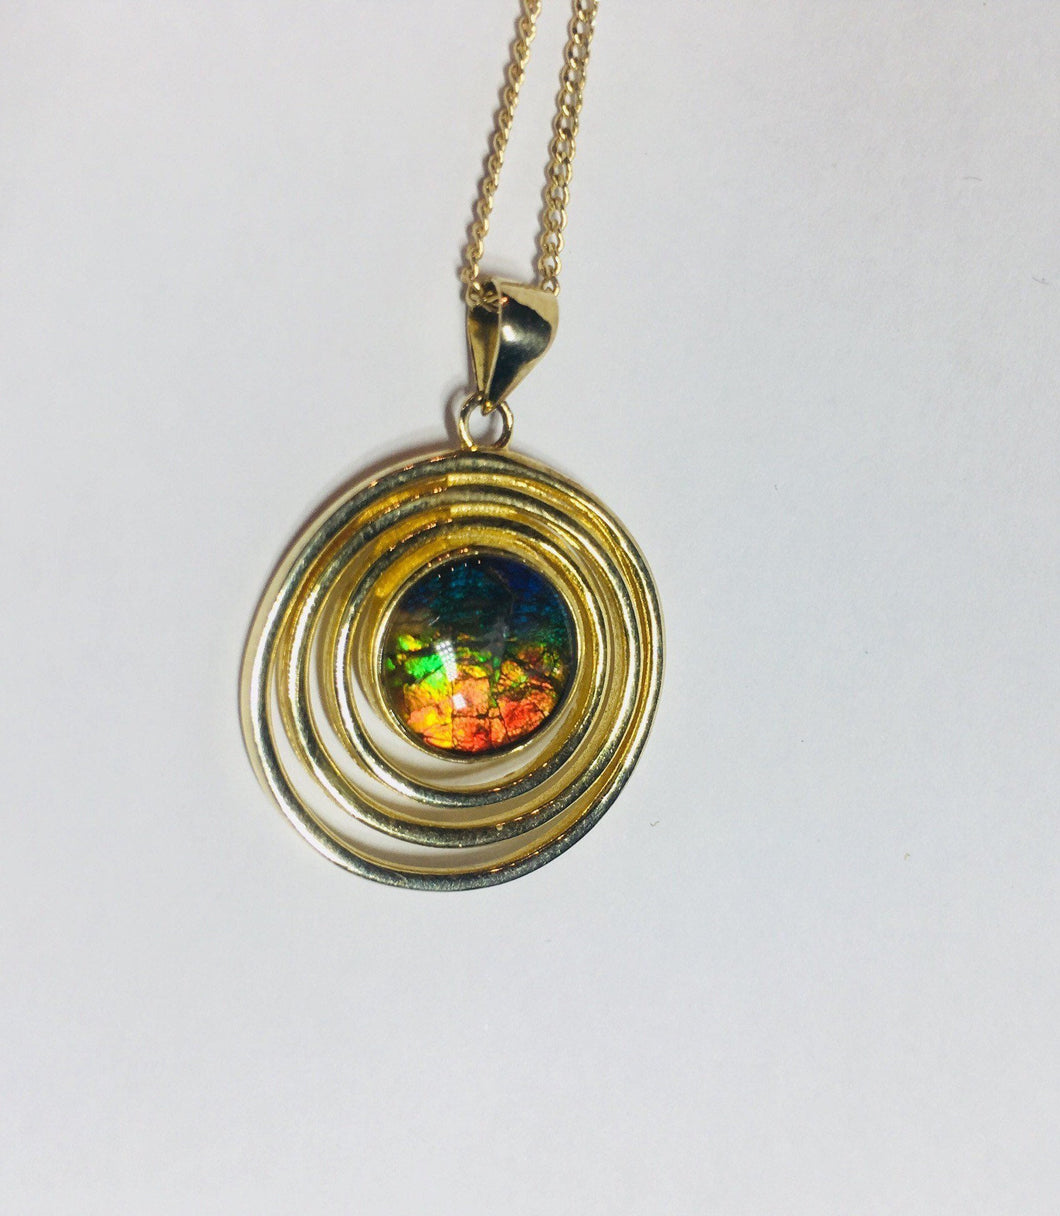 Rainbow Ammolite pendant in gold plated sterling silver setting